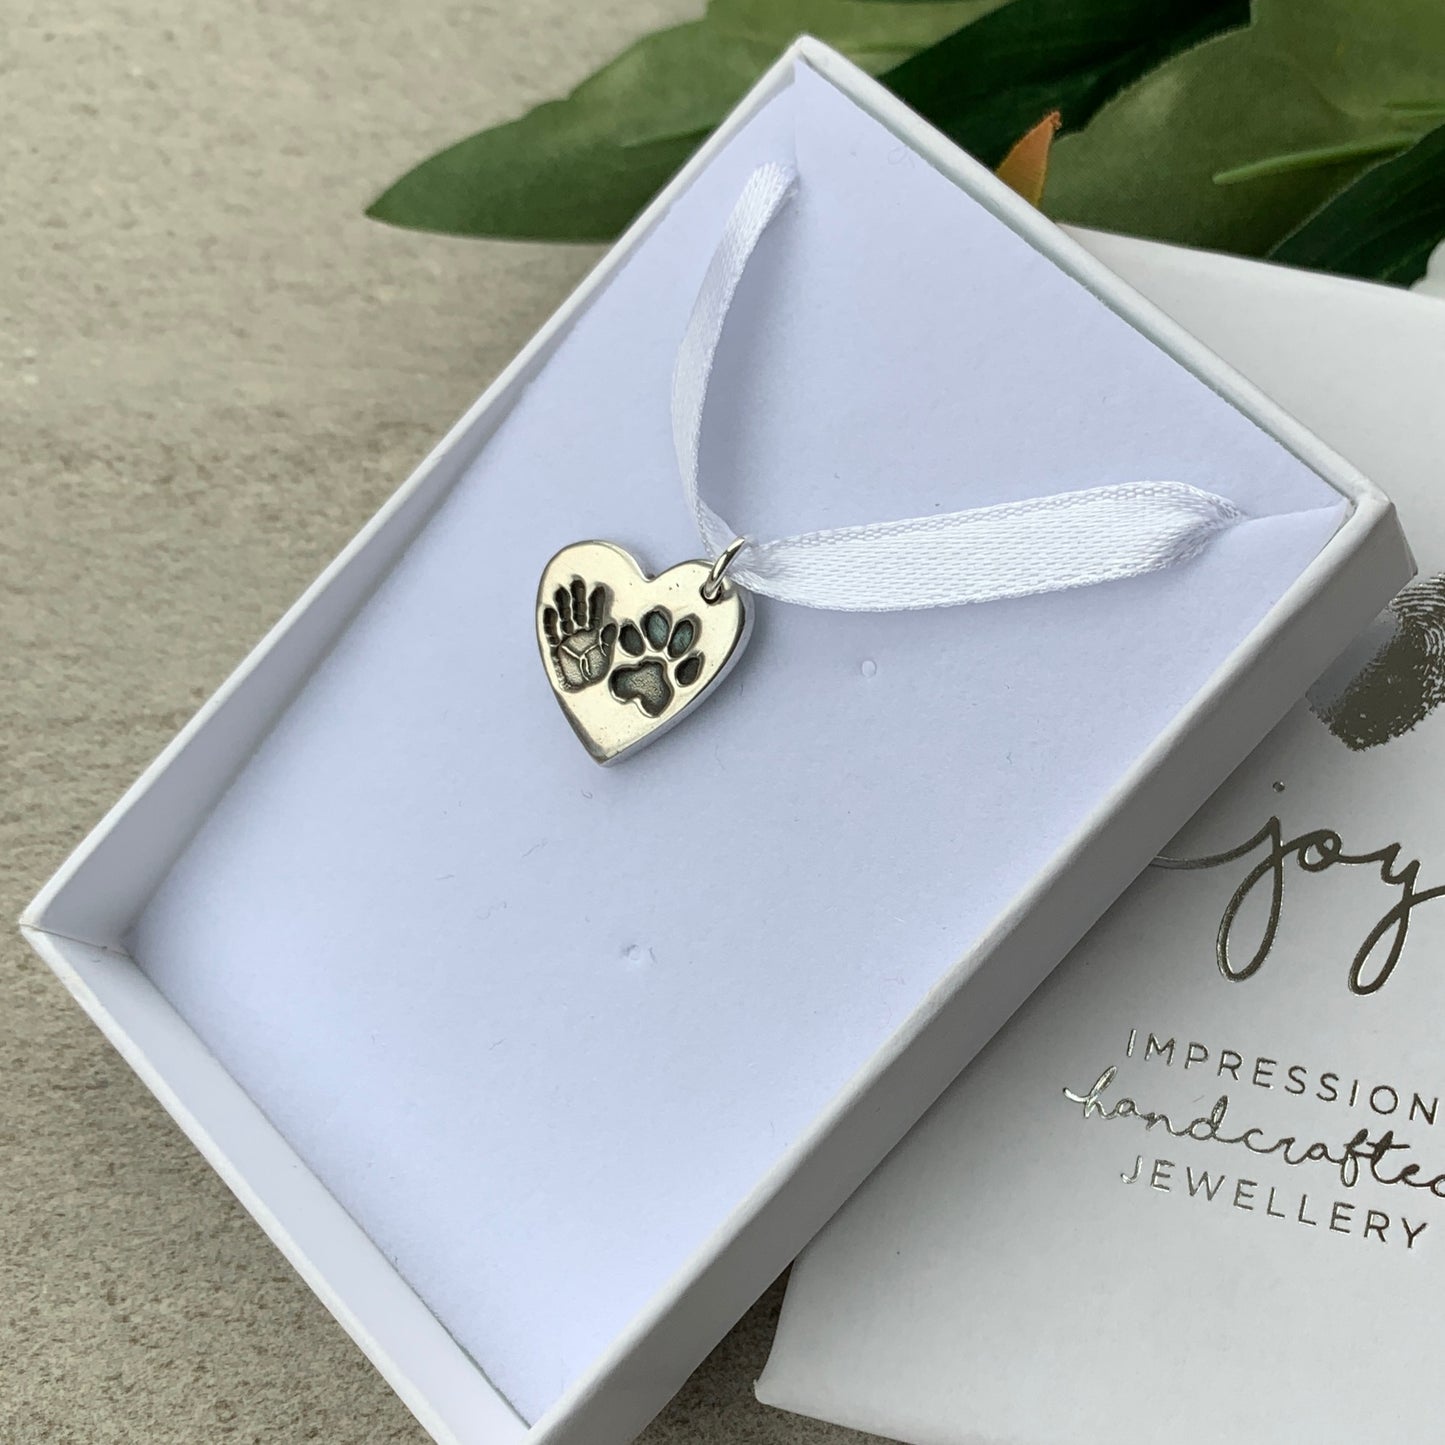 Handprint and Pawprint together on one heart charm with names on reverse by Joy Impressions